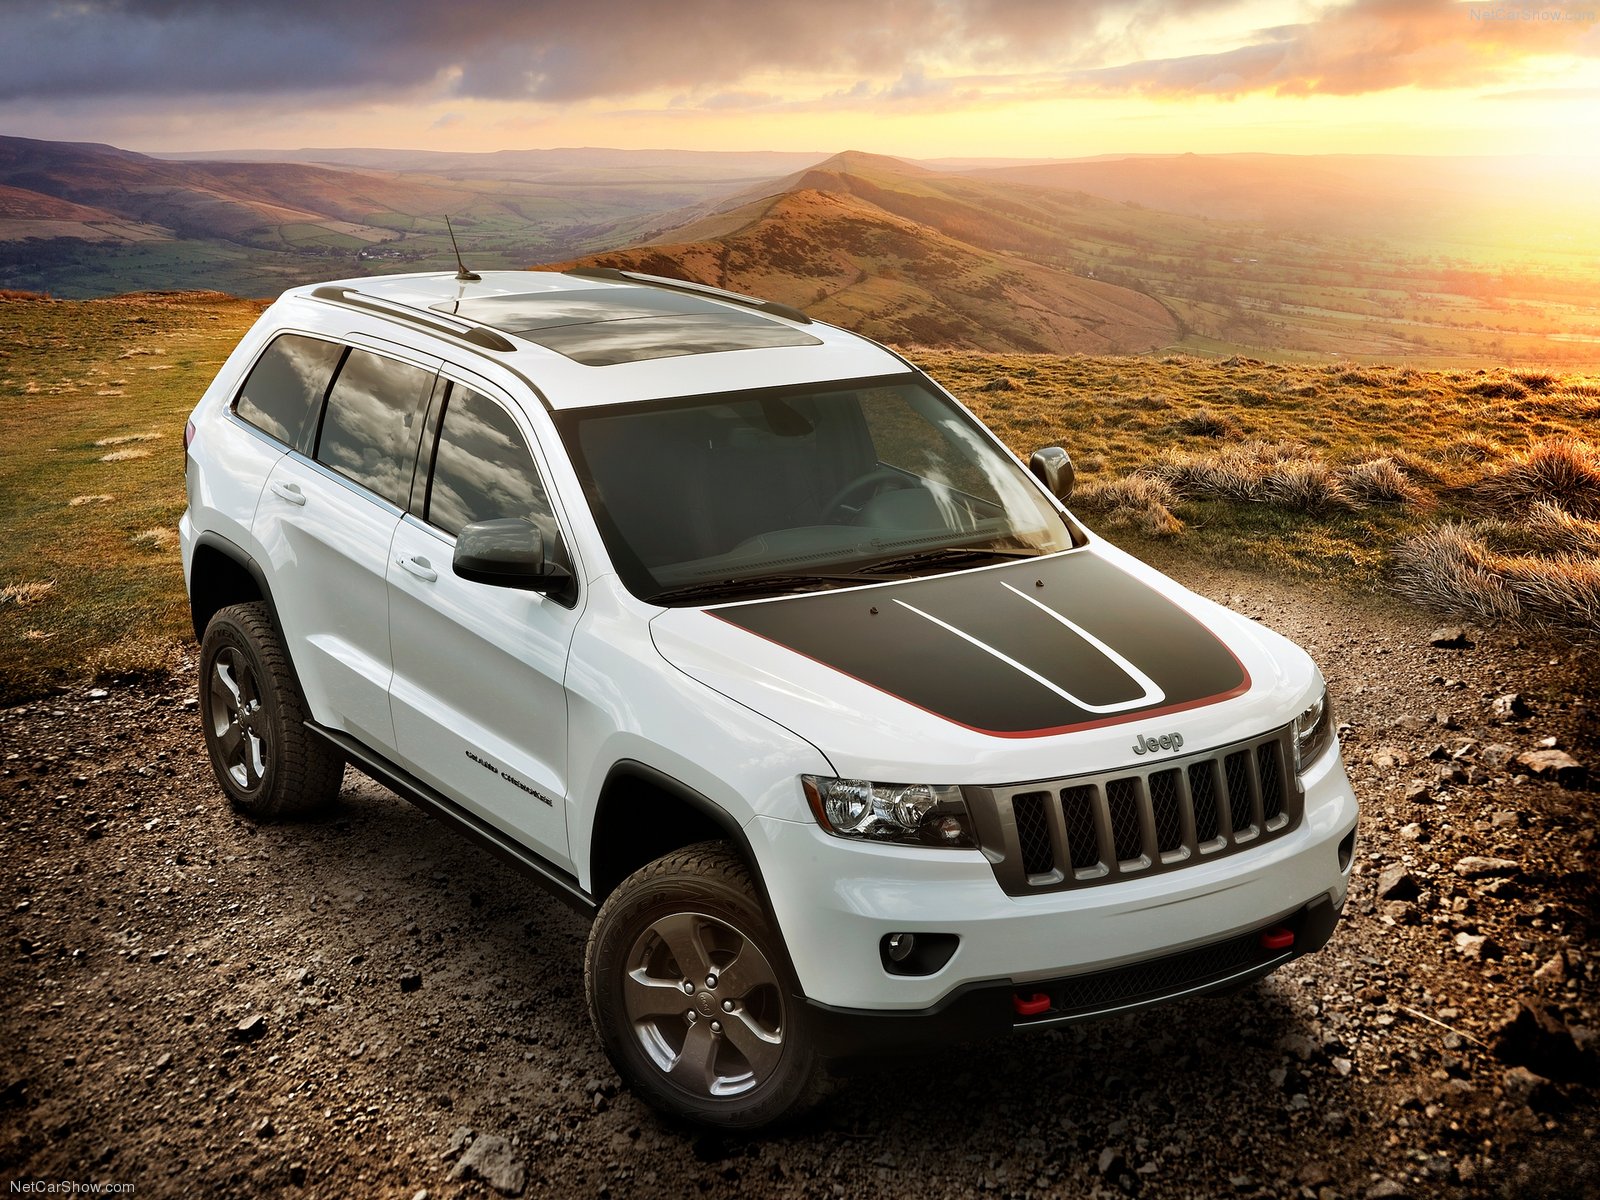 The Cherokee Trailhawk